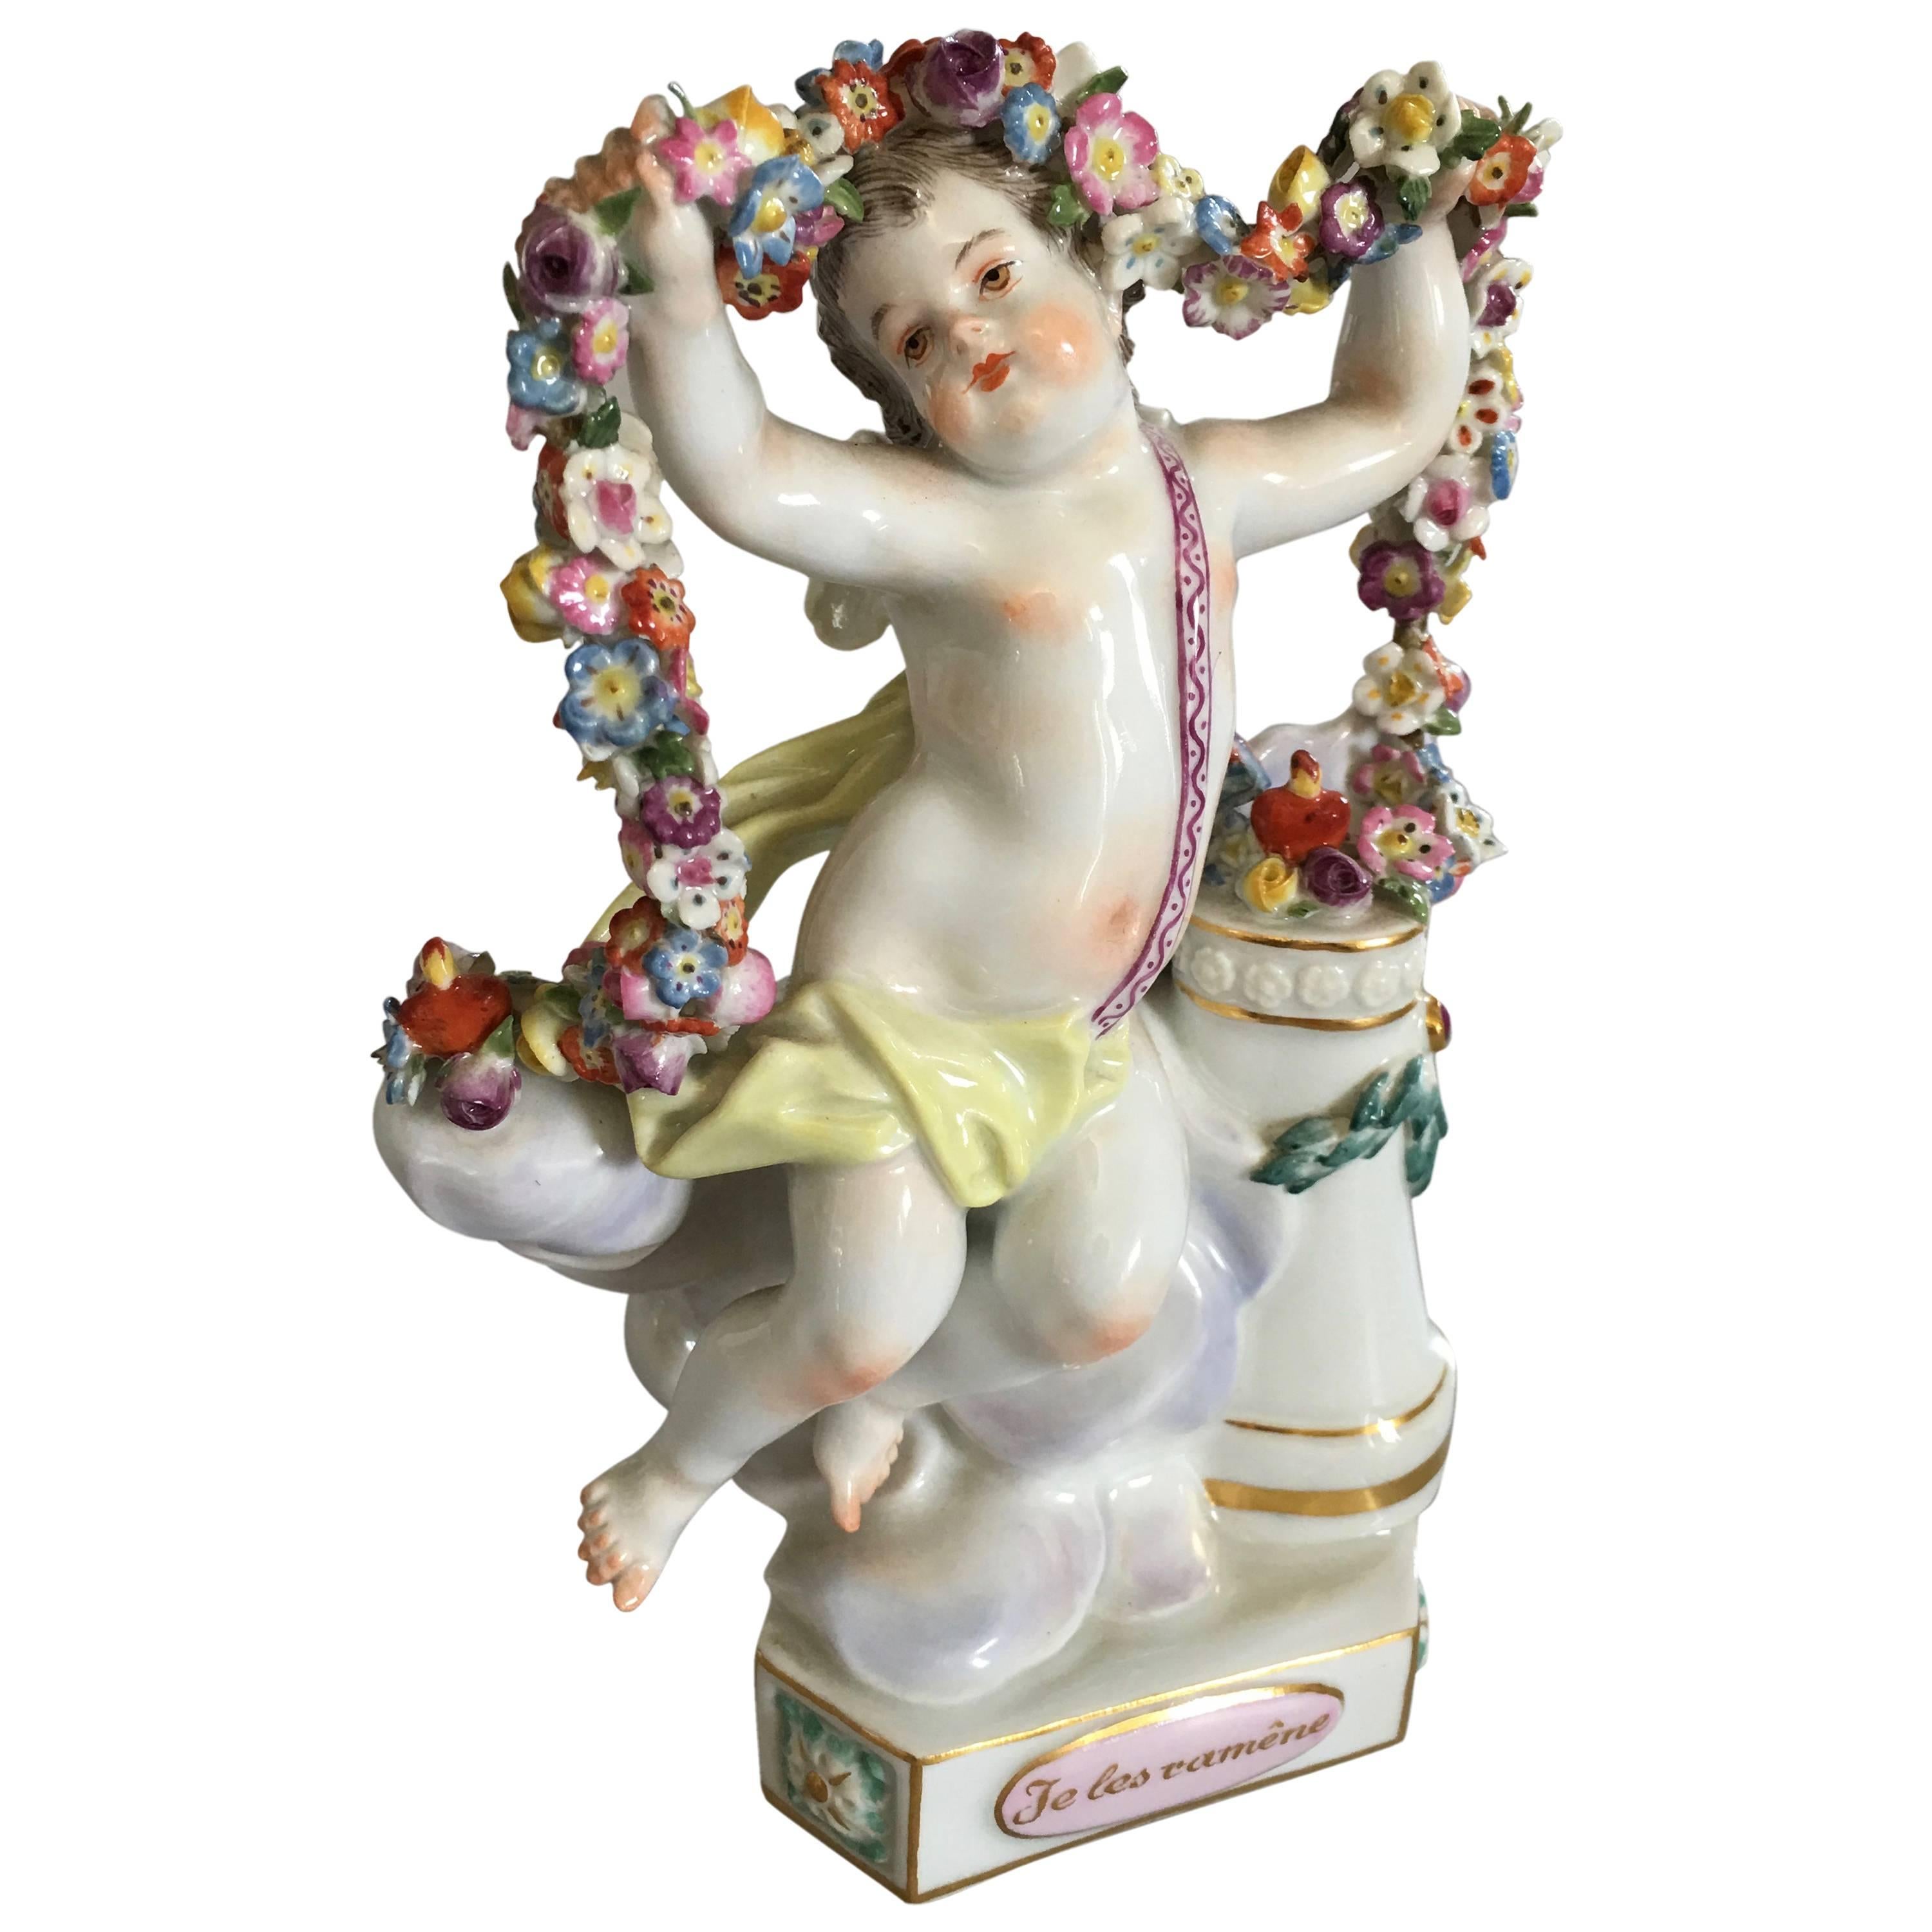 Meisen Figurine of Winged Putti Holding a Floral Wine 